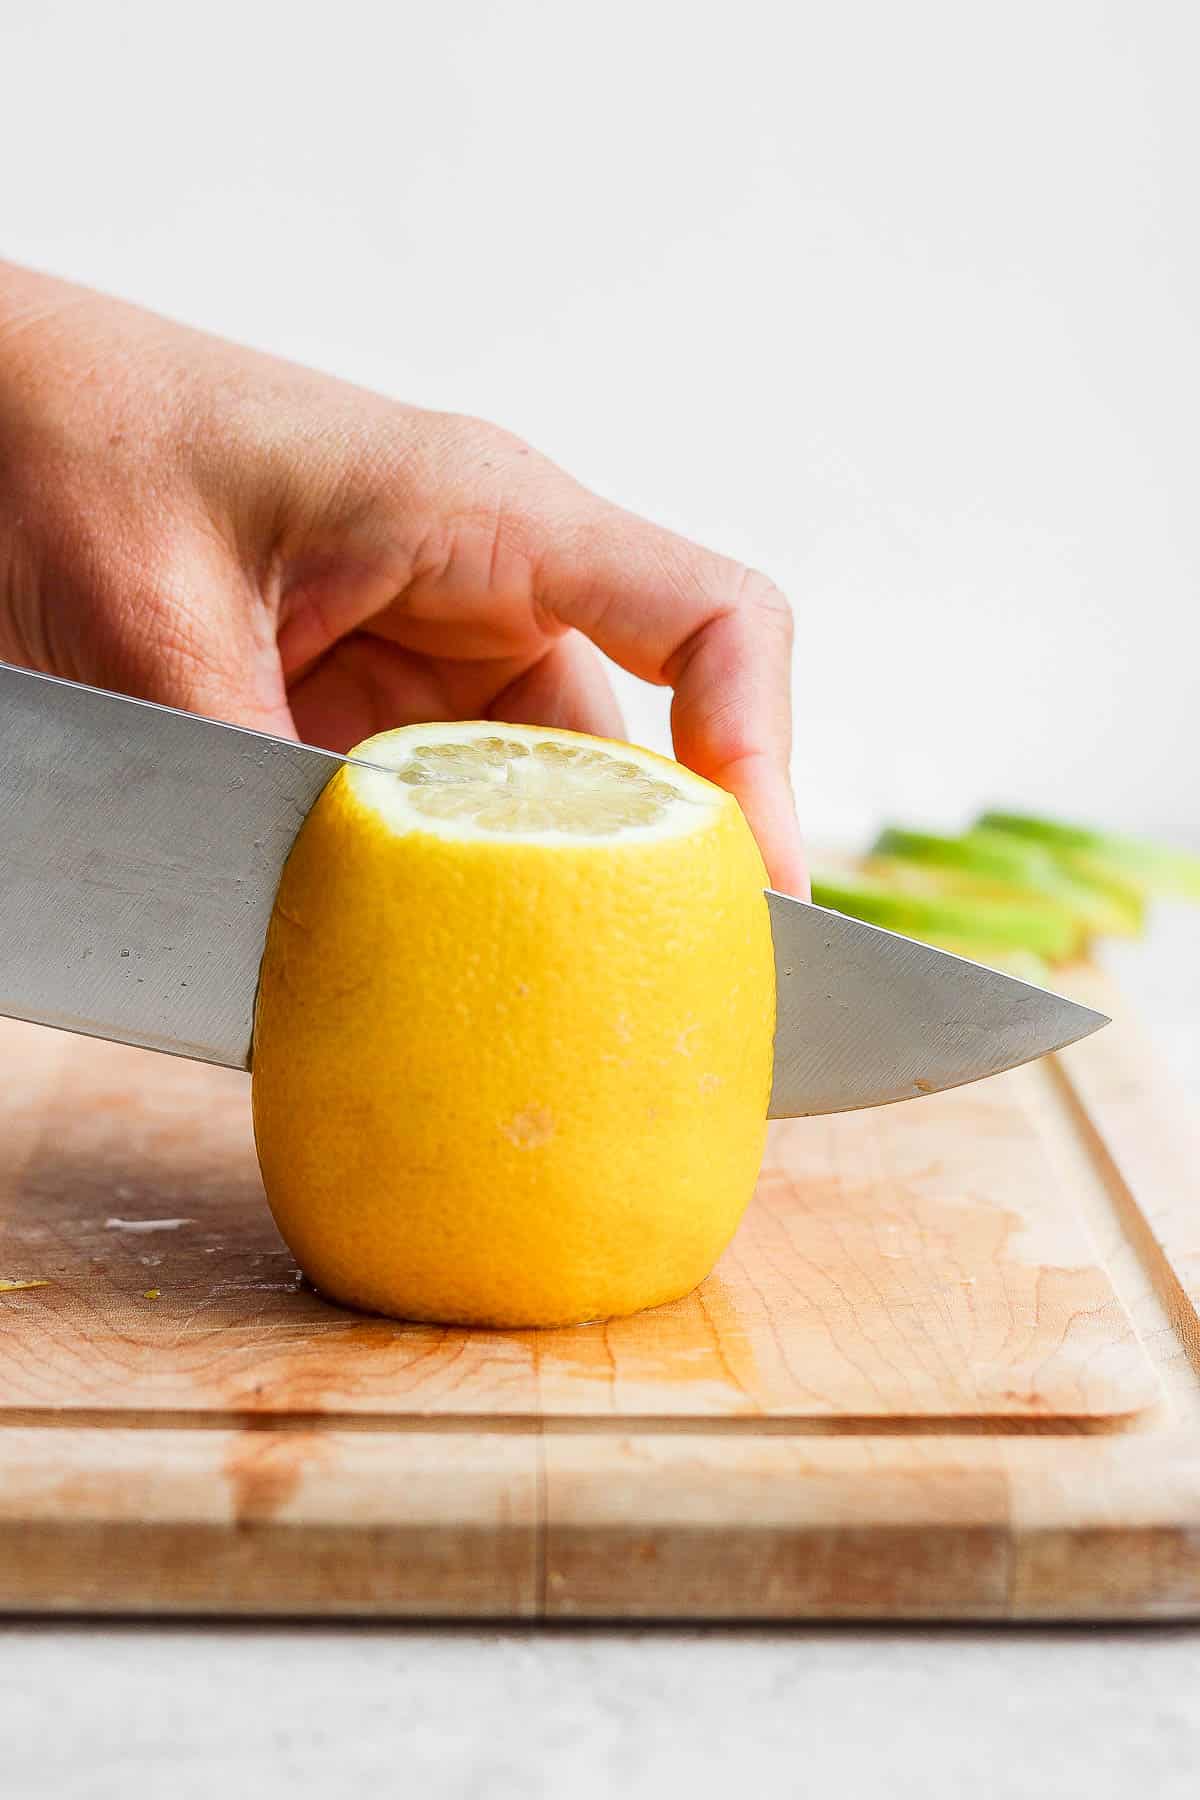 Large lemon on cutting board getting cut with large knife